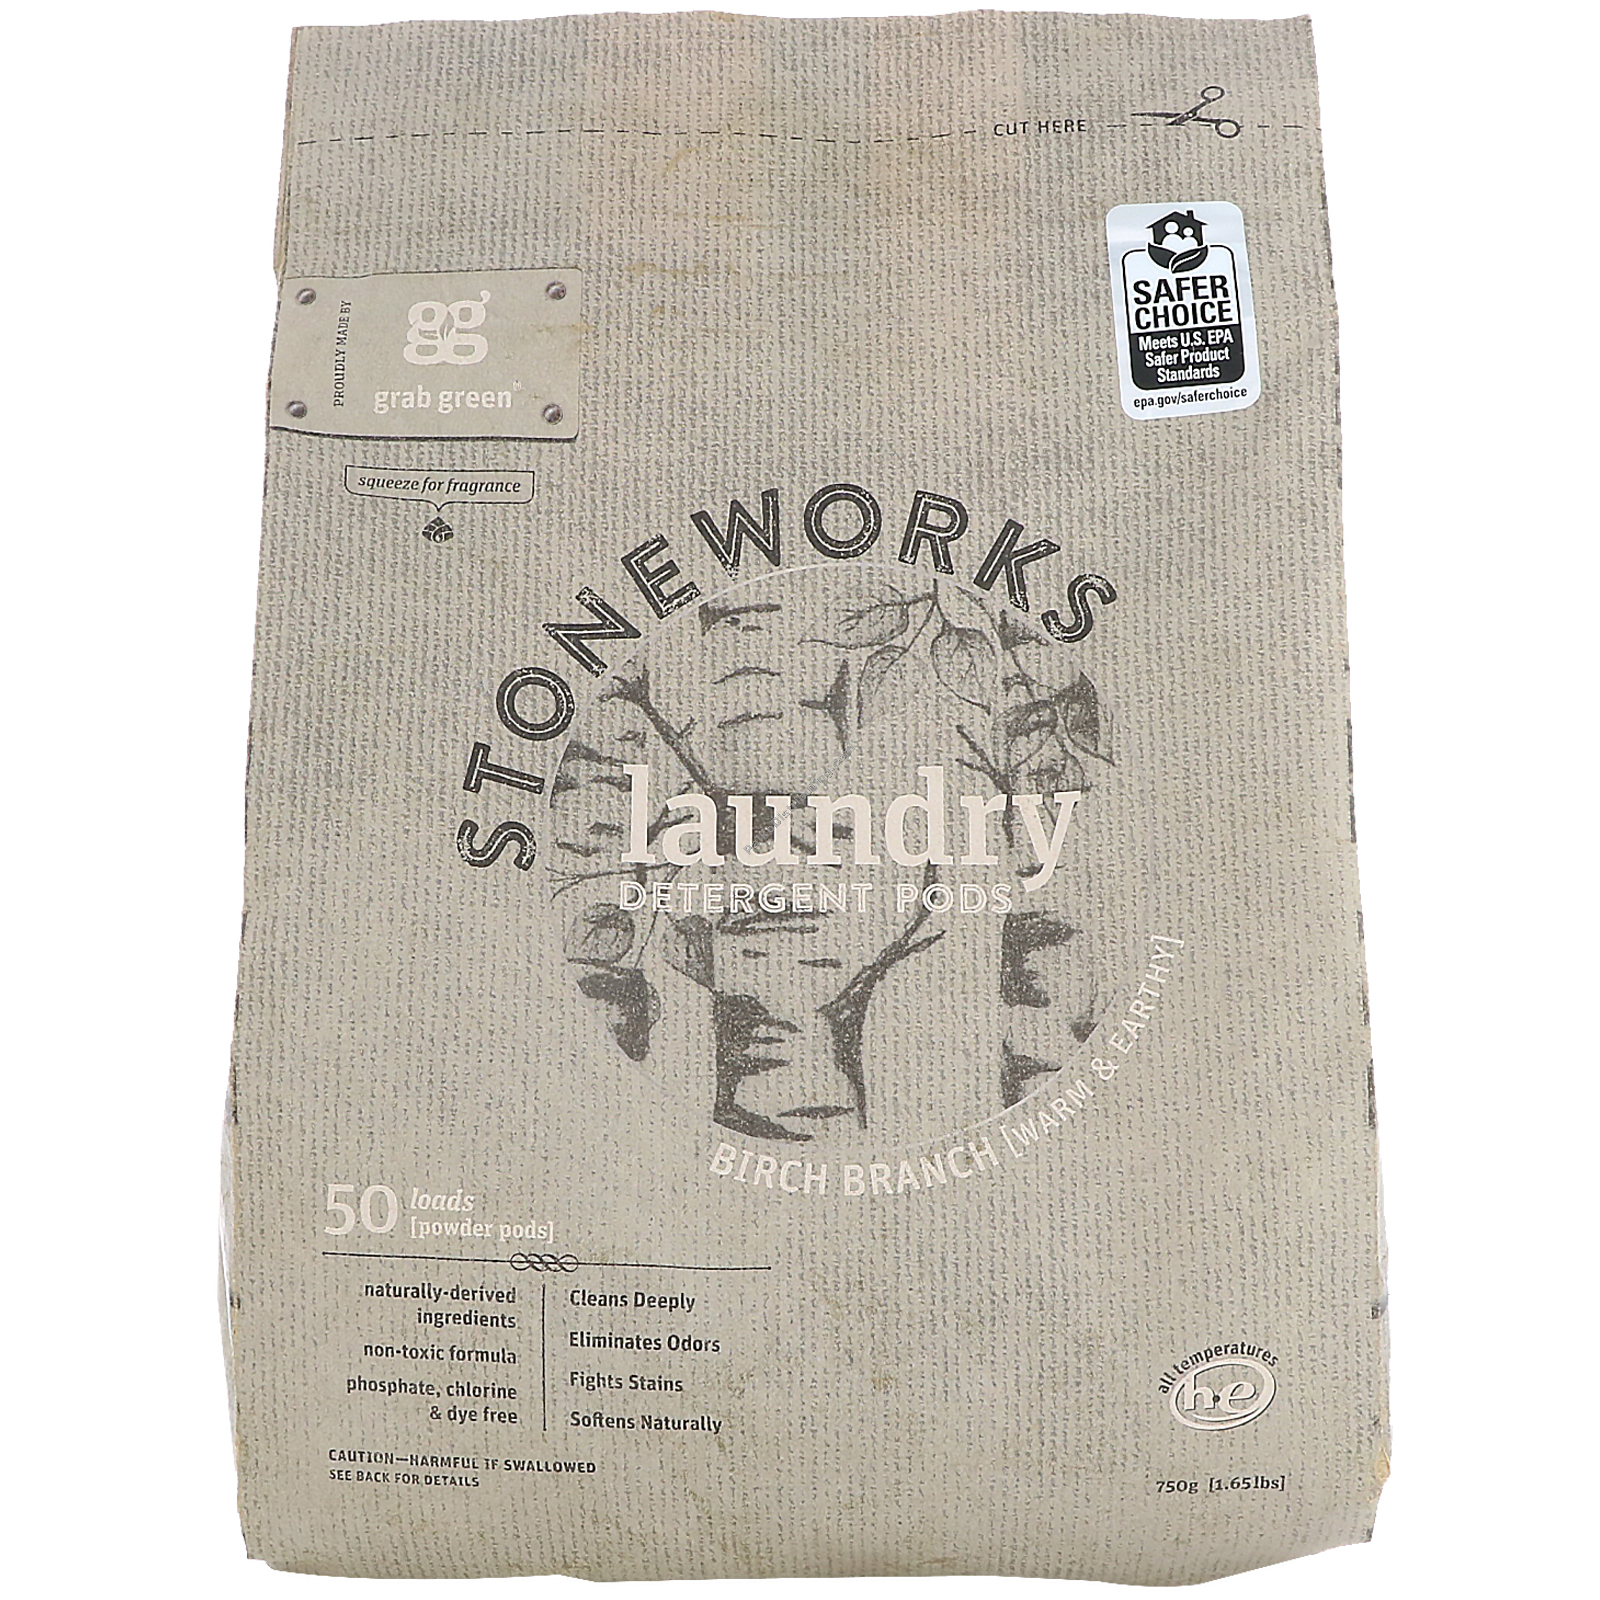 Product Image: Stoneworks Laundry Pods Birch Branch